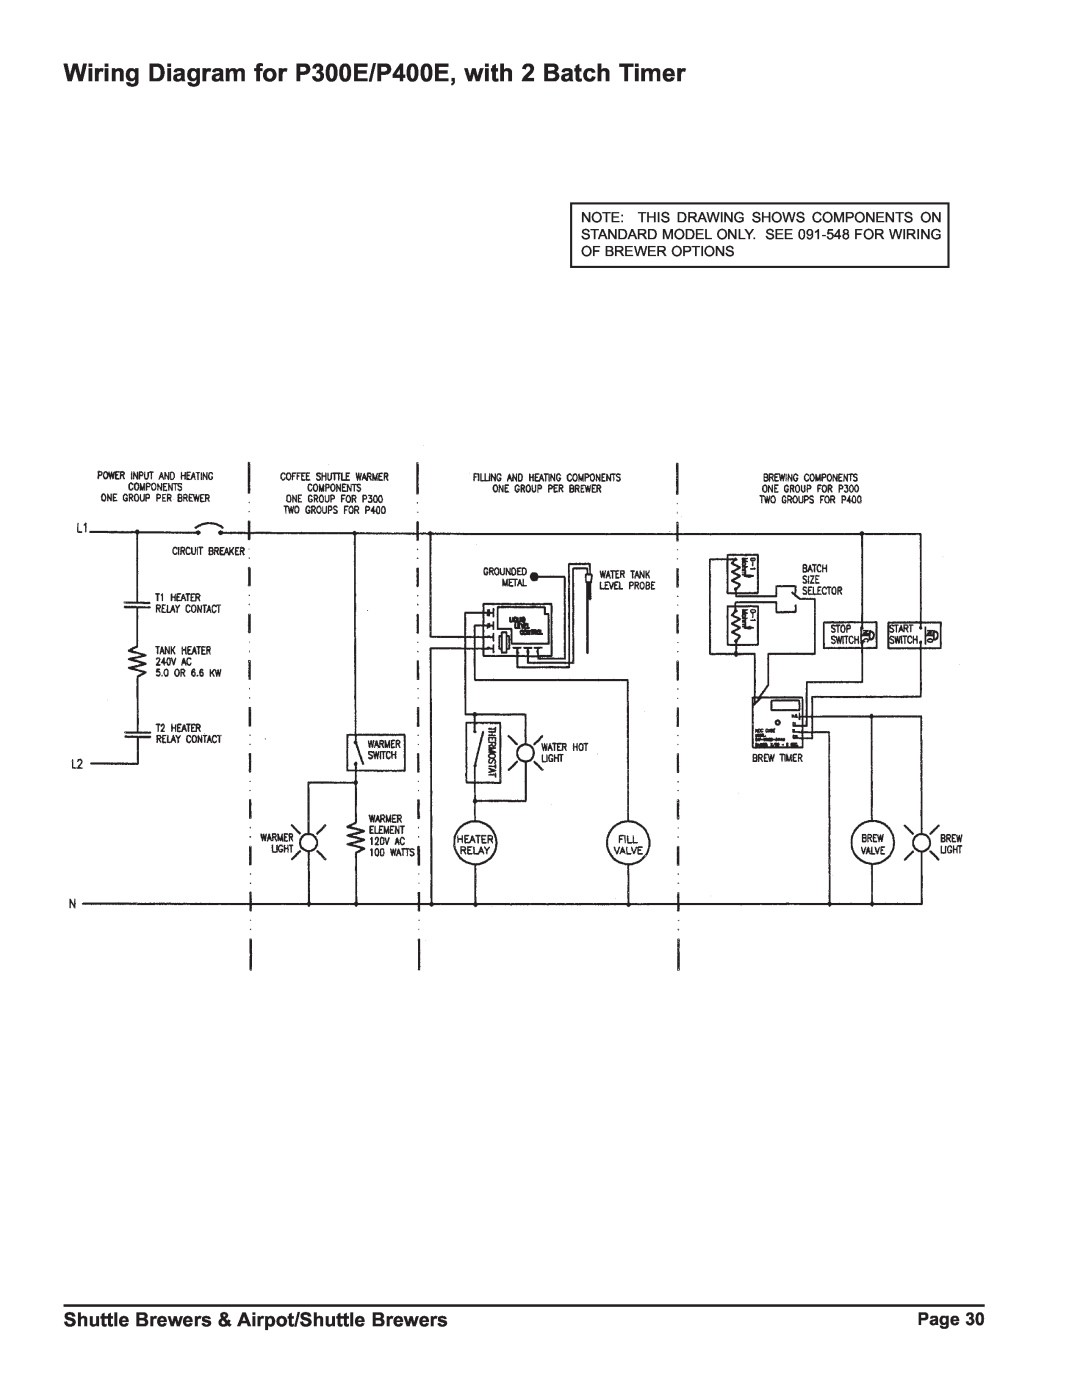 Grindmaster P400ESHP Wiring Diagram for P300E/P400E, with 2 Batch Timer, Shuttle Brewers & Airpot/Shuttle Brewers 